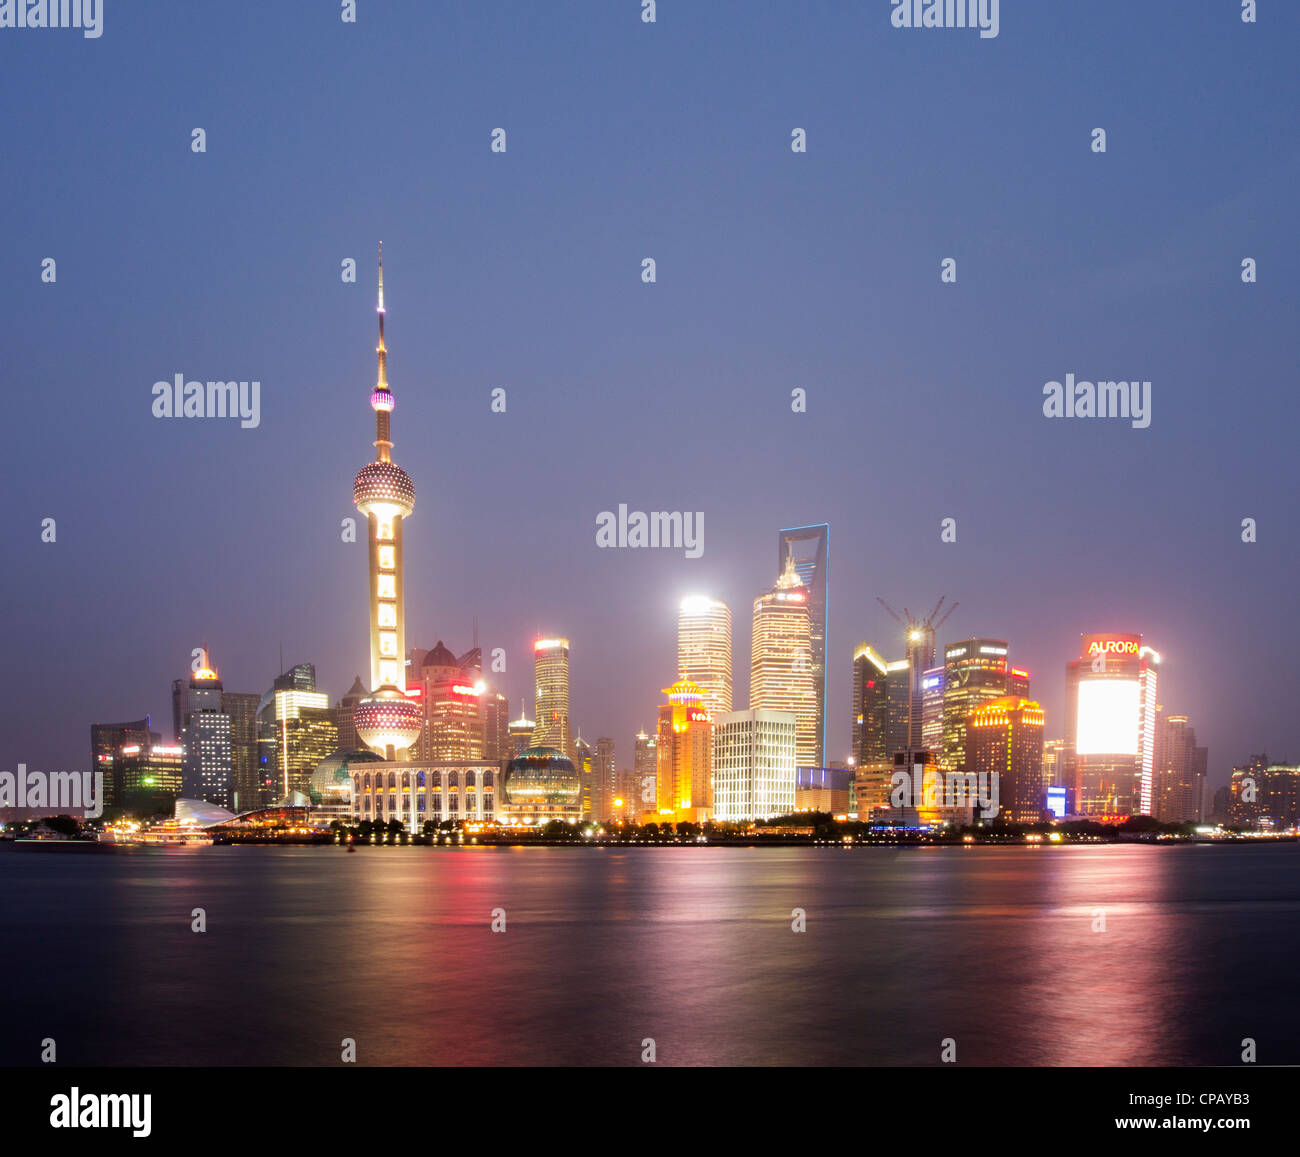 View at night of cityscape and skyscrapers of Pudong district of Shanghai in China Stock Photo